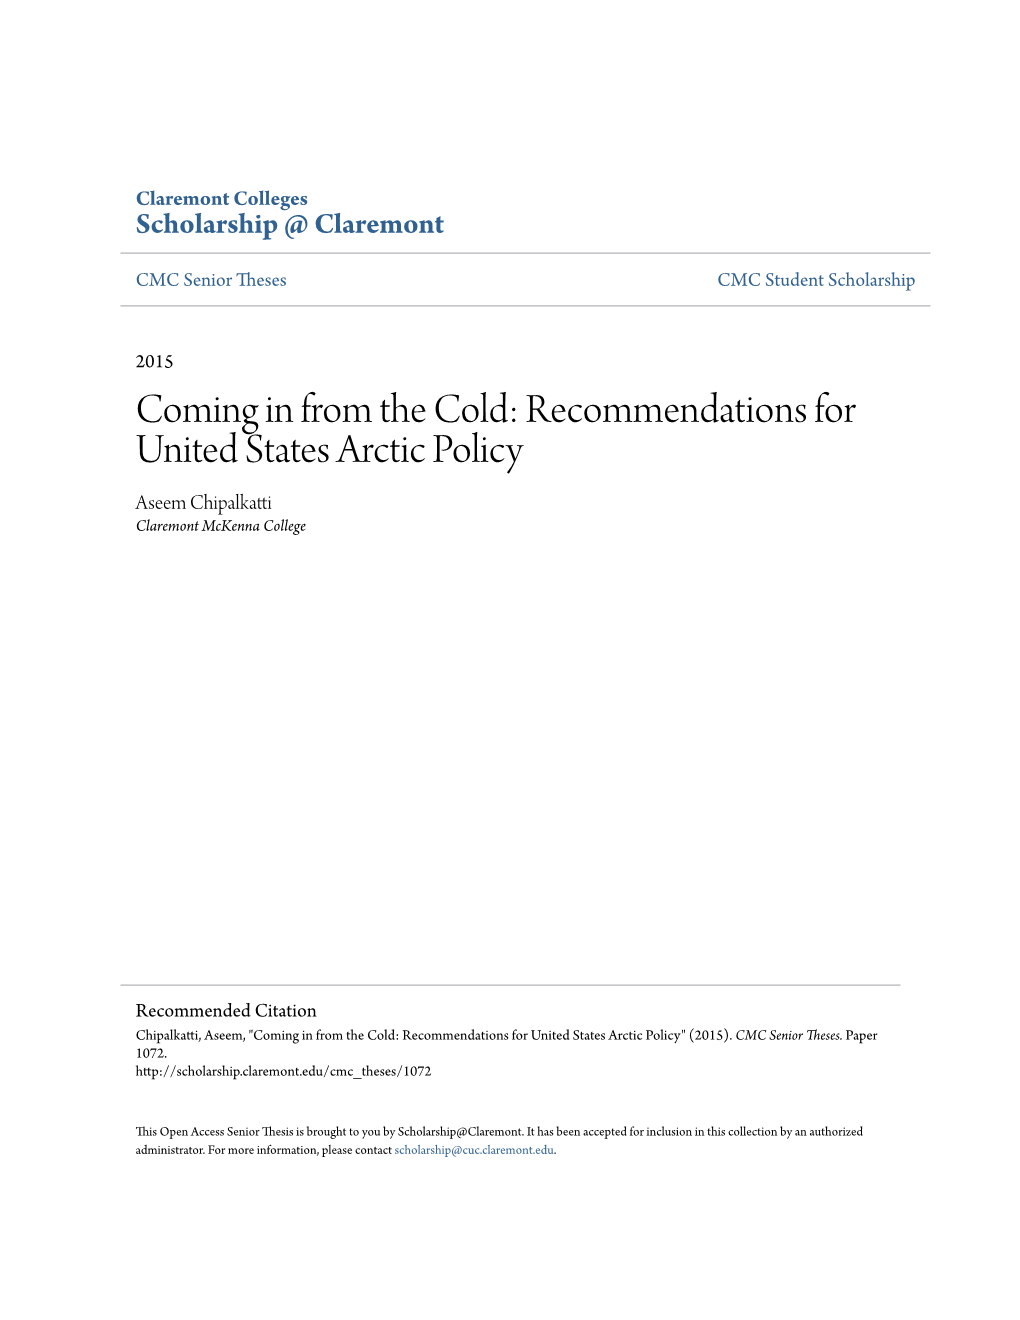 Recommendations for United States Arctic Policy Aseem Chipalkatti Claremont Mckenna College